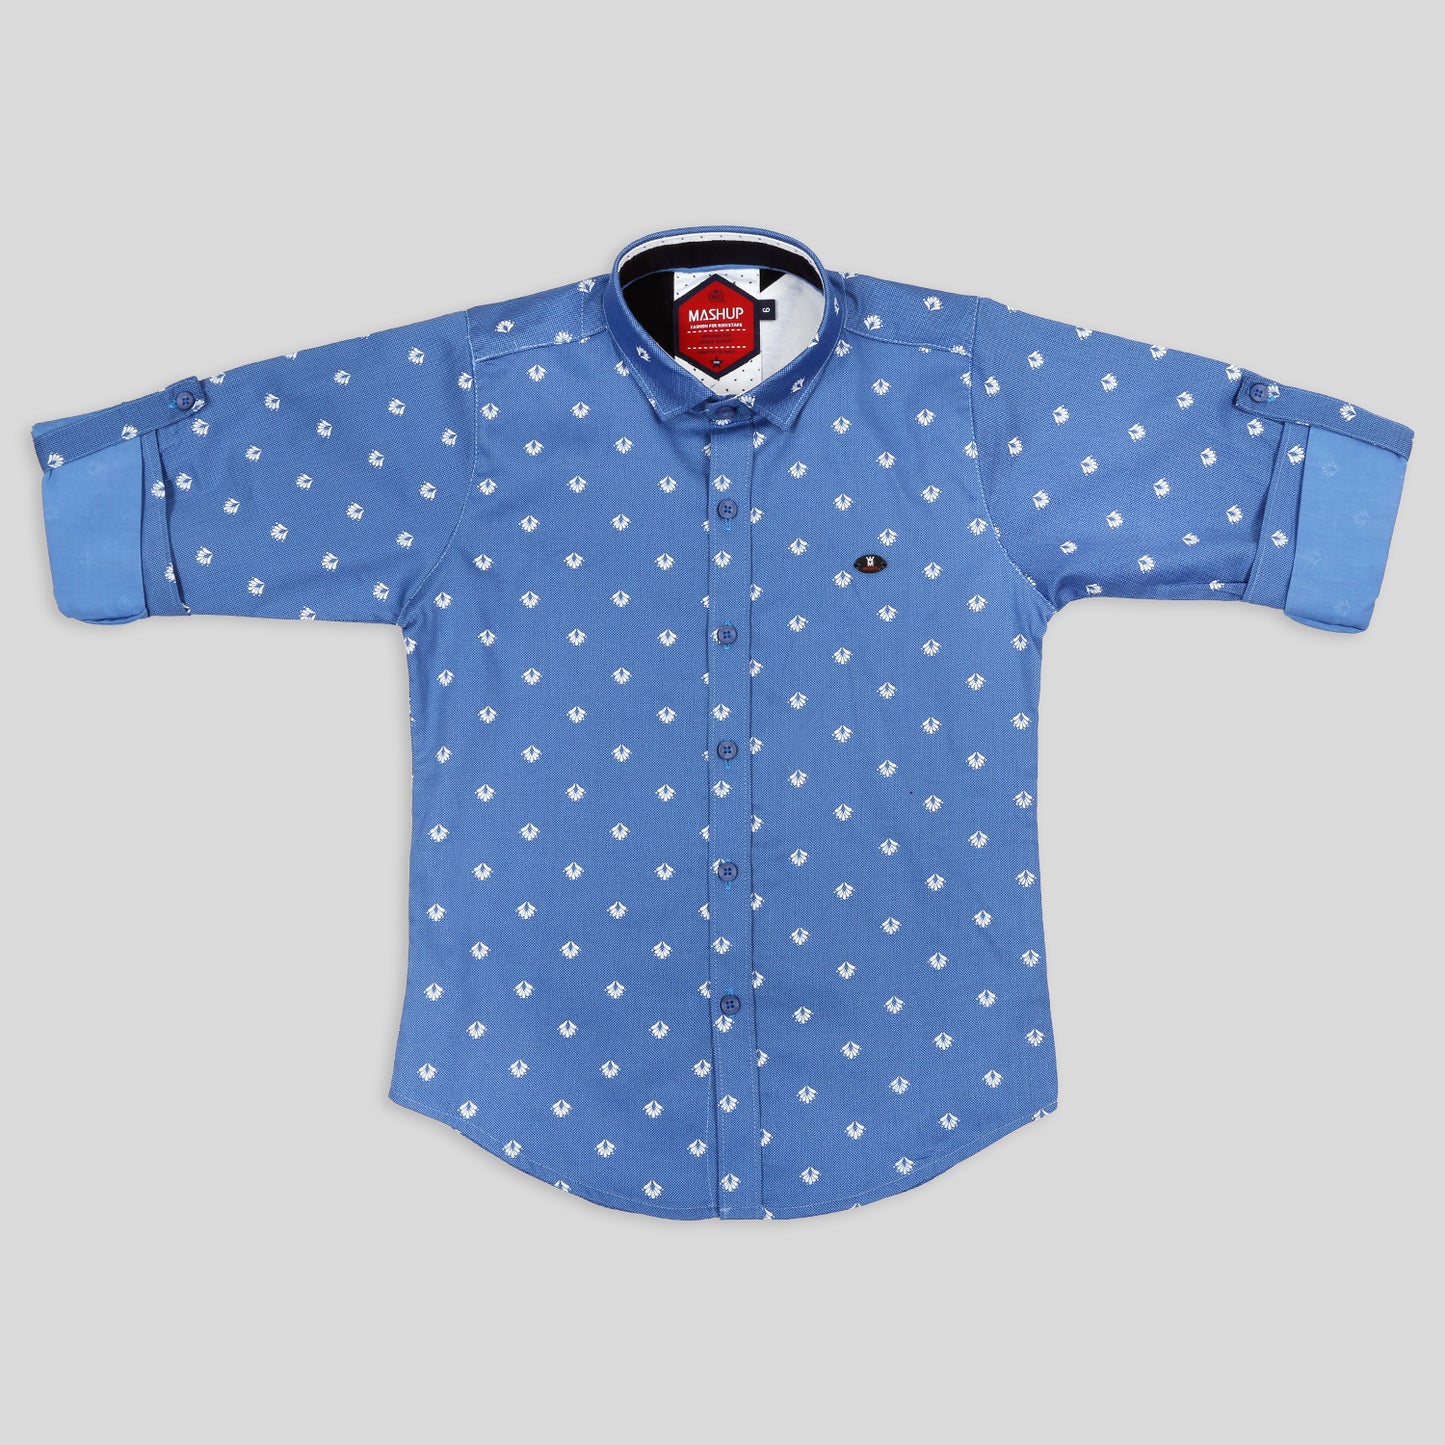 Polka Dot Parade: Elevate Casual Coolness with This Unique Shirt!